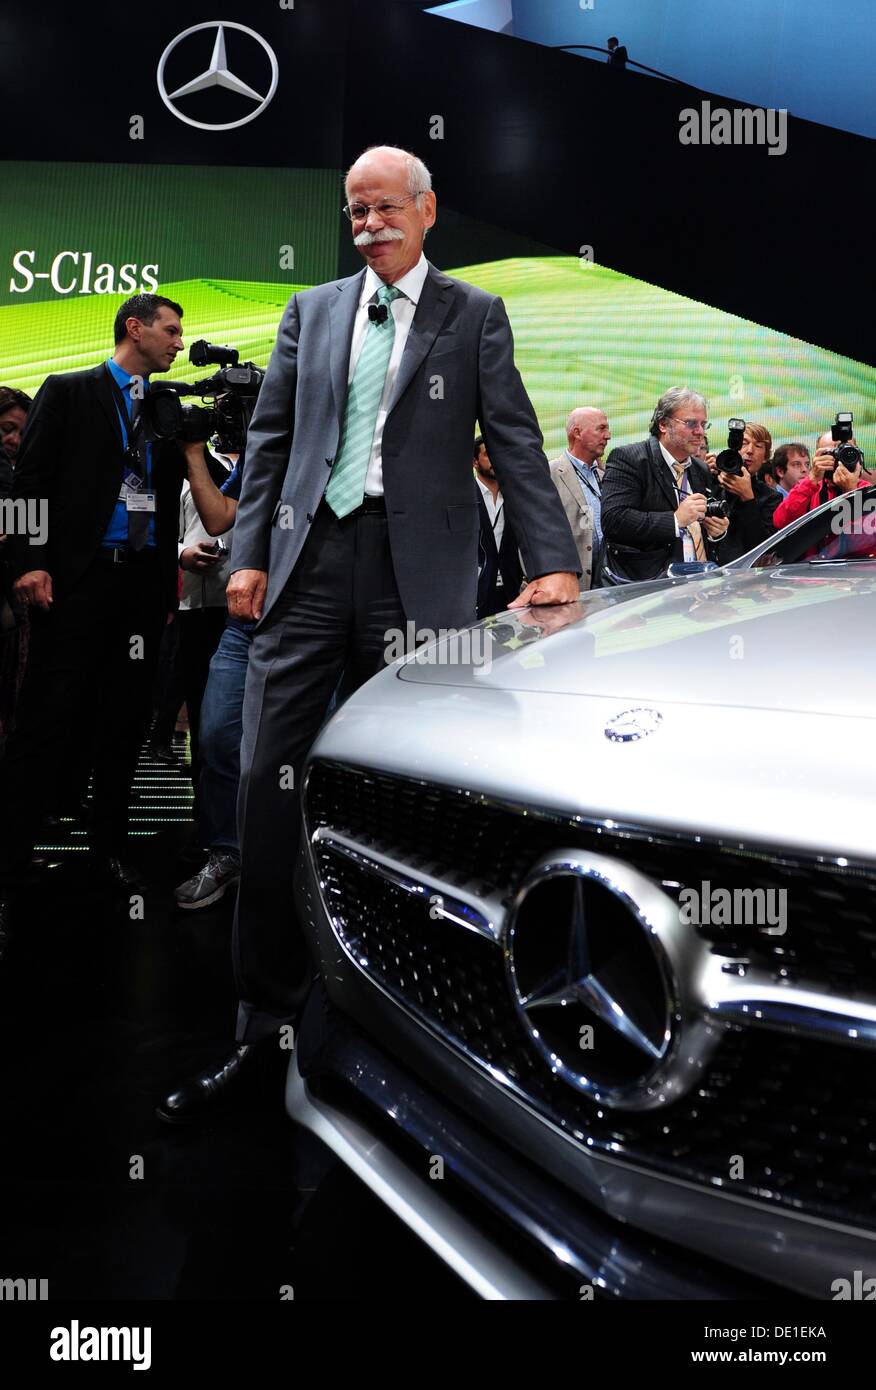 Frankfurt, Germany. 10th Sep, 2013. Chairman of Daimler AG, Dieter Zetsche, stands next to a Concept S-Class Coupe at the exhibition booth of Mercedes-Benz during the press day of the Frankfurt Motor Show (IAA) in Frankfurt, Germany, 10 September 2013. One of the most important car exhibitions in the world, Frankfurt Motor Show will be opened officially 12 September by German Chancellor Angela Merkel, running until 22 September 2013. Photo: DANIEL REINHARDT/dpa/Alamy Live News Stock Photo